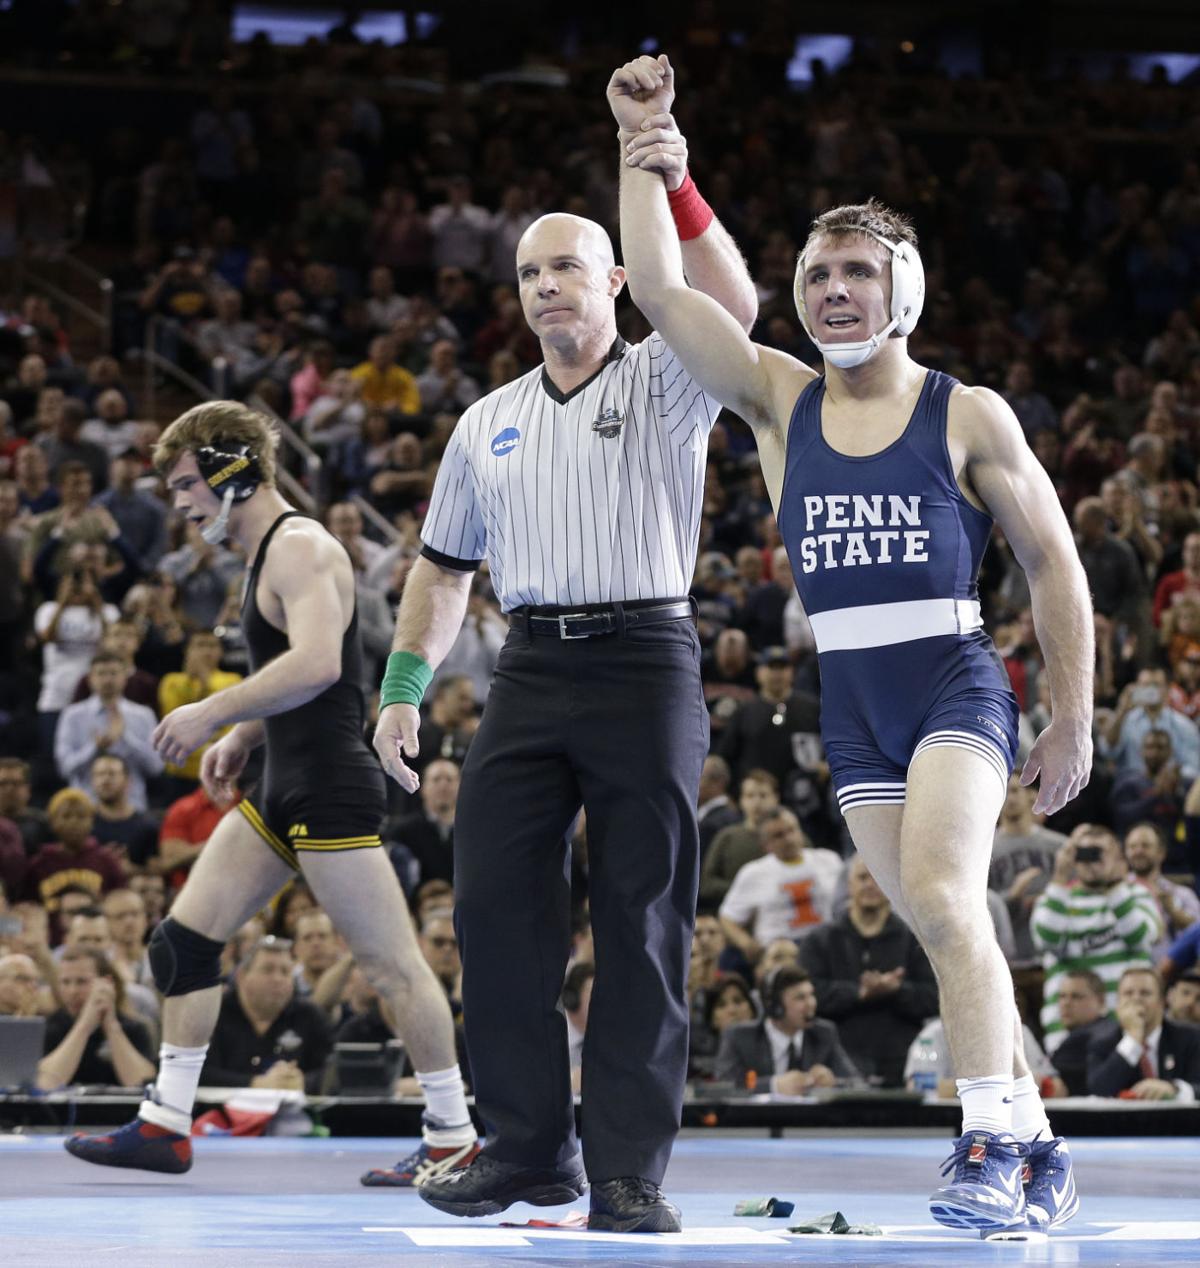 Penn State wins National Wrestling title; Retherford and Megaludis win